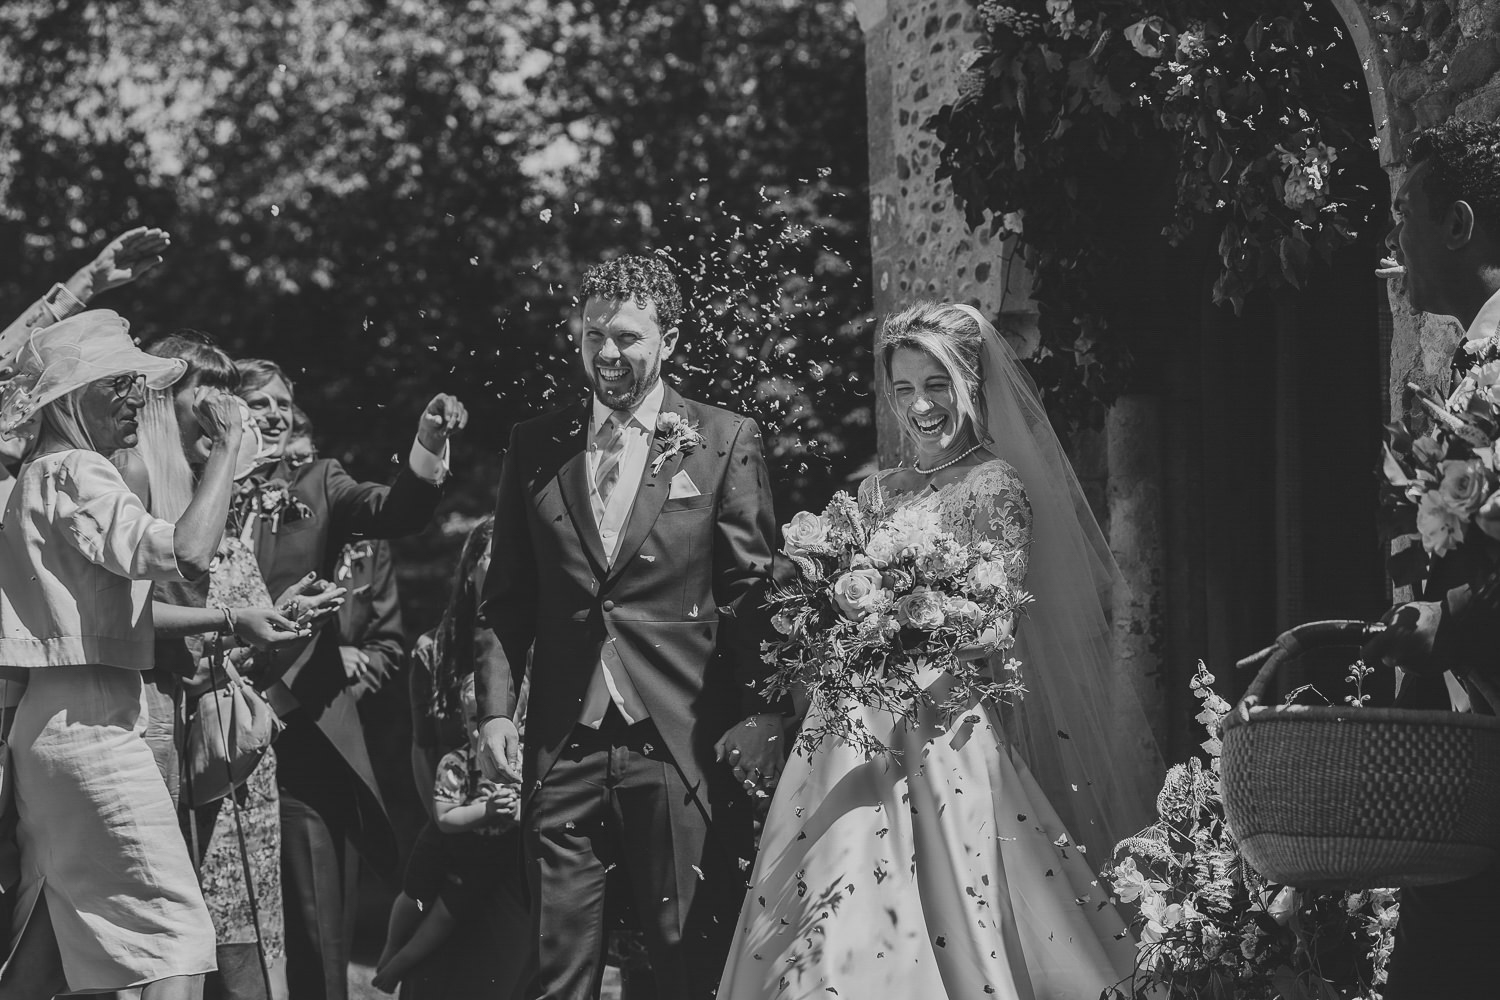 Bride and groom walking through confetti in the sunshine